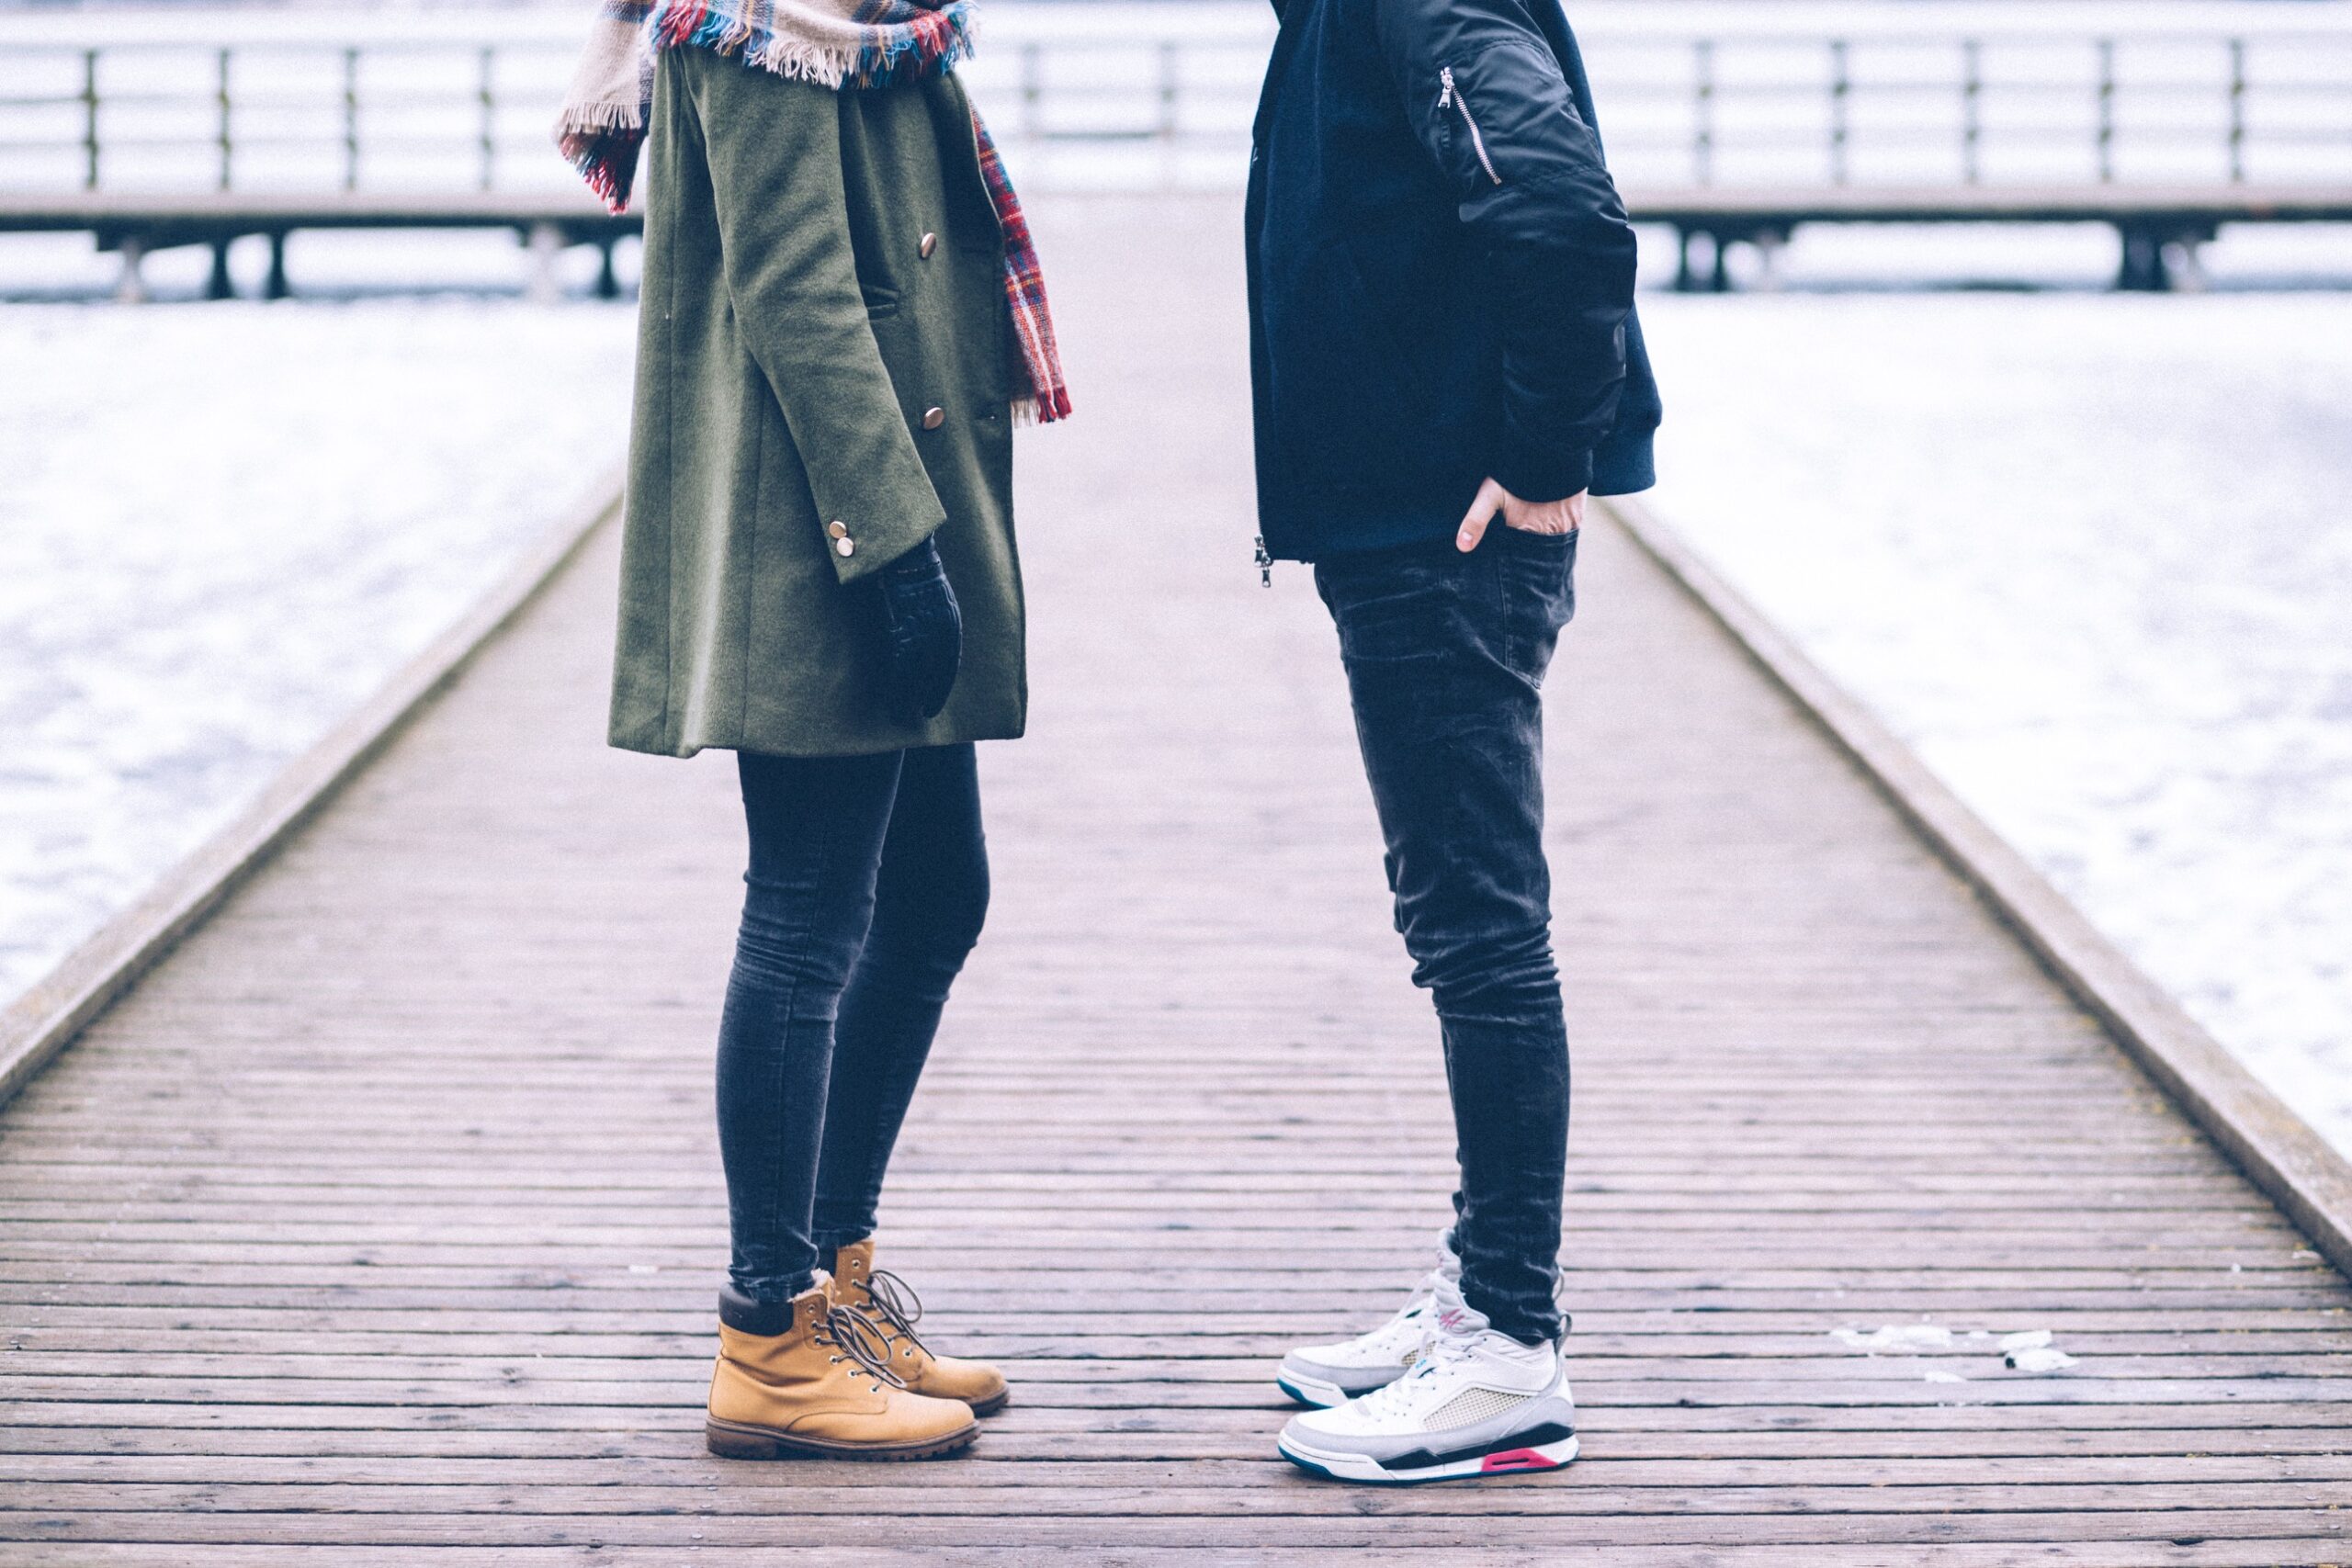 Expert dating coach for introverts in London